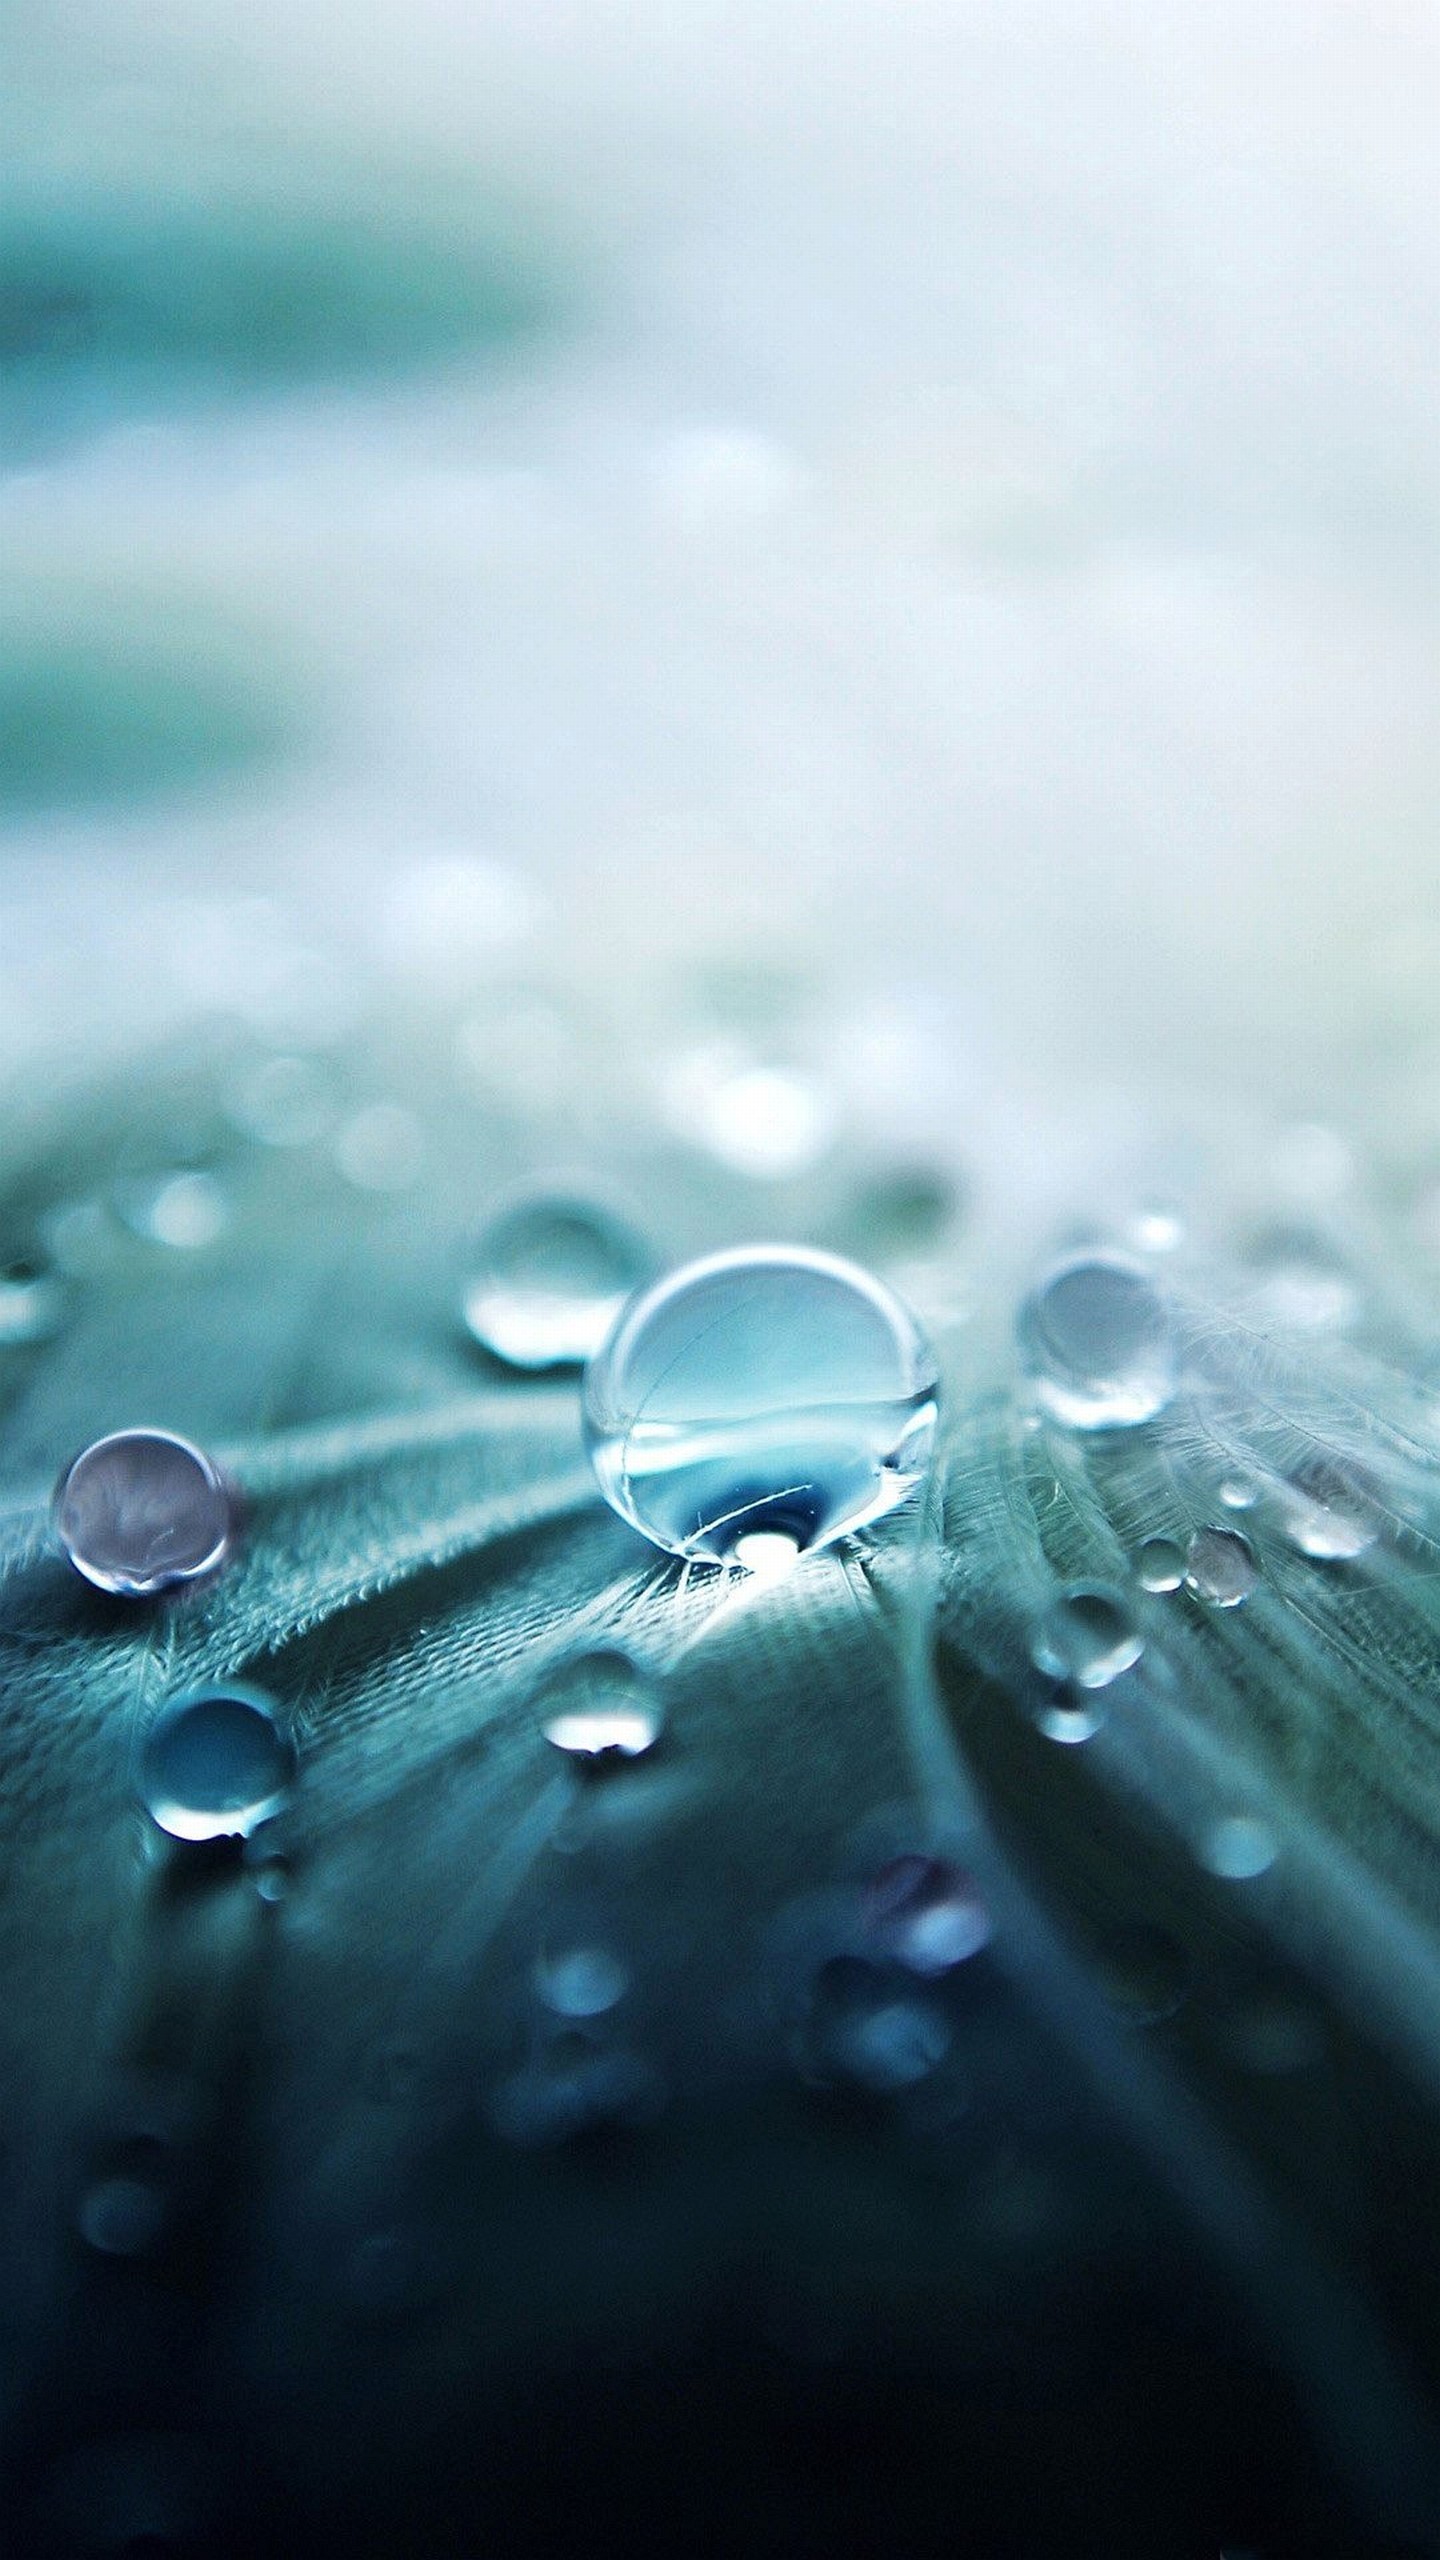 1440x2560 Wallpaper samsung galaxy s6 water drop awesome